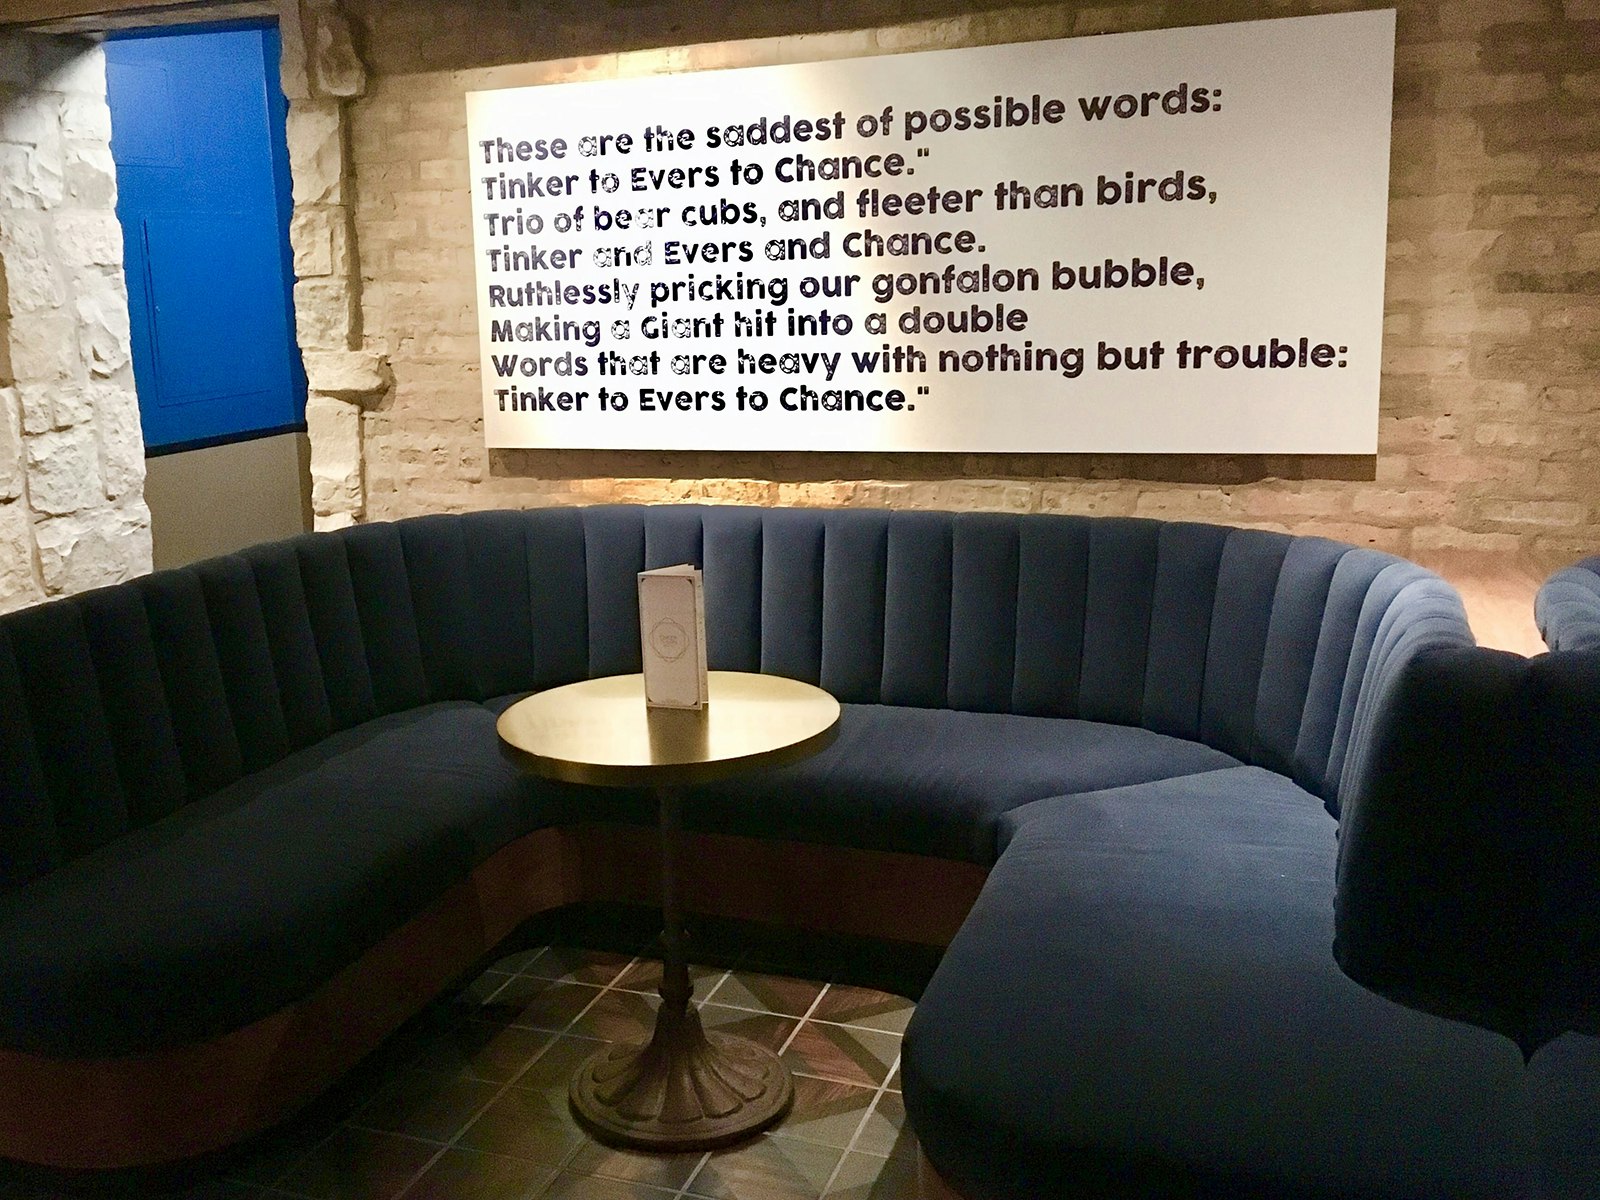 A cornflower blue velvet banquette sits in front of a white brick wall with a large-format reprint of the 1910 poem "Tinker to Evers" on it at the cocktail bar Tinker to Evera